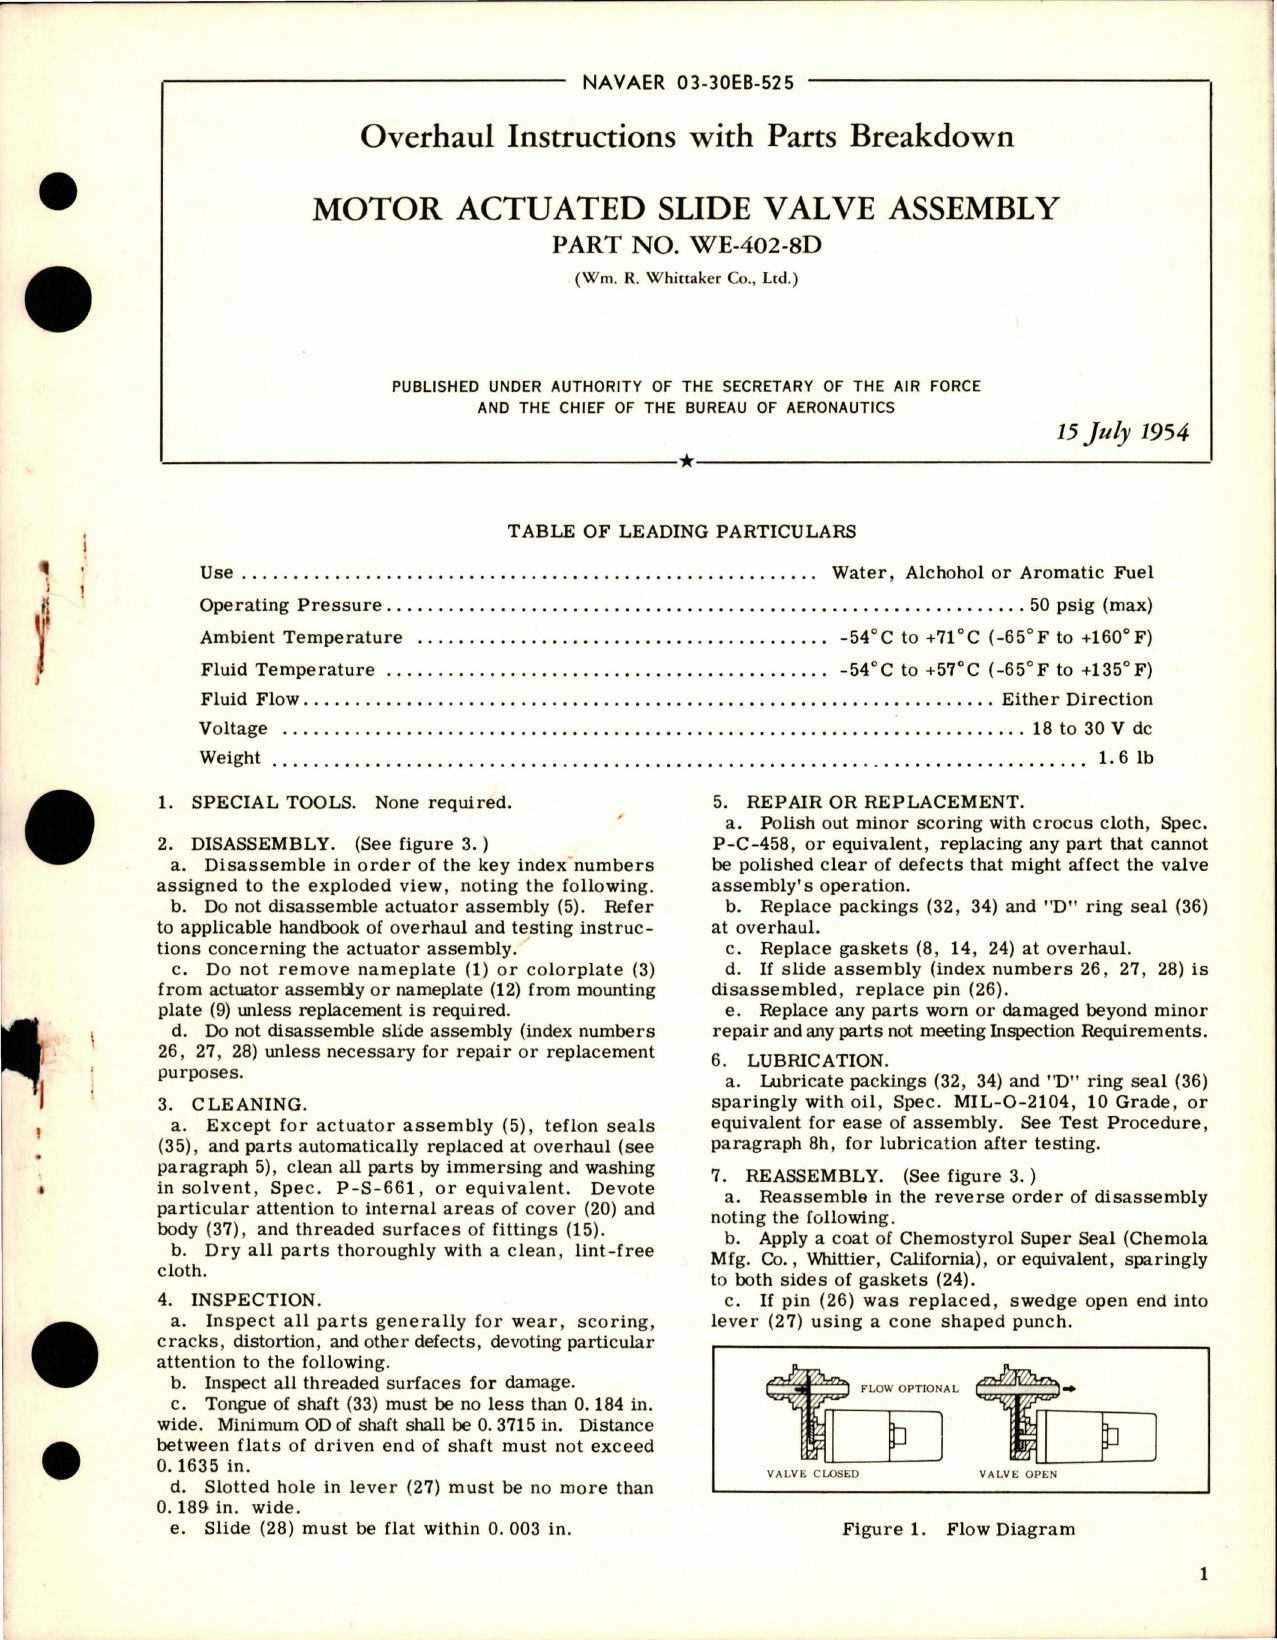 Sample page 1 from AirCorps Library document: Overhaul Instructions with Parts for Motor Actuated Slide Valve Assembly - Part WE-402-8D